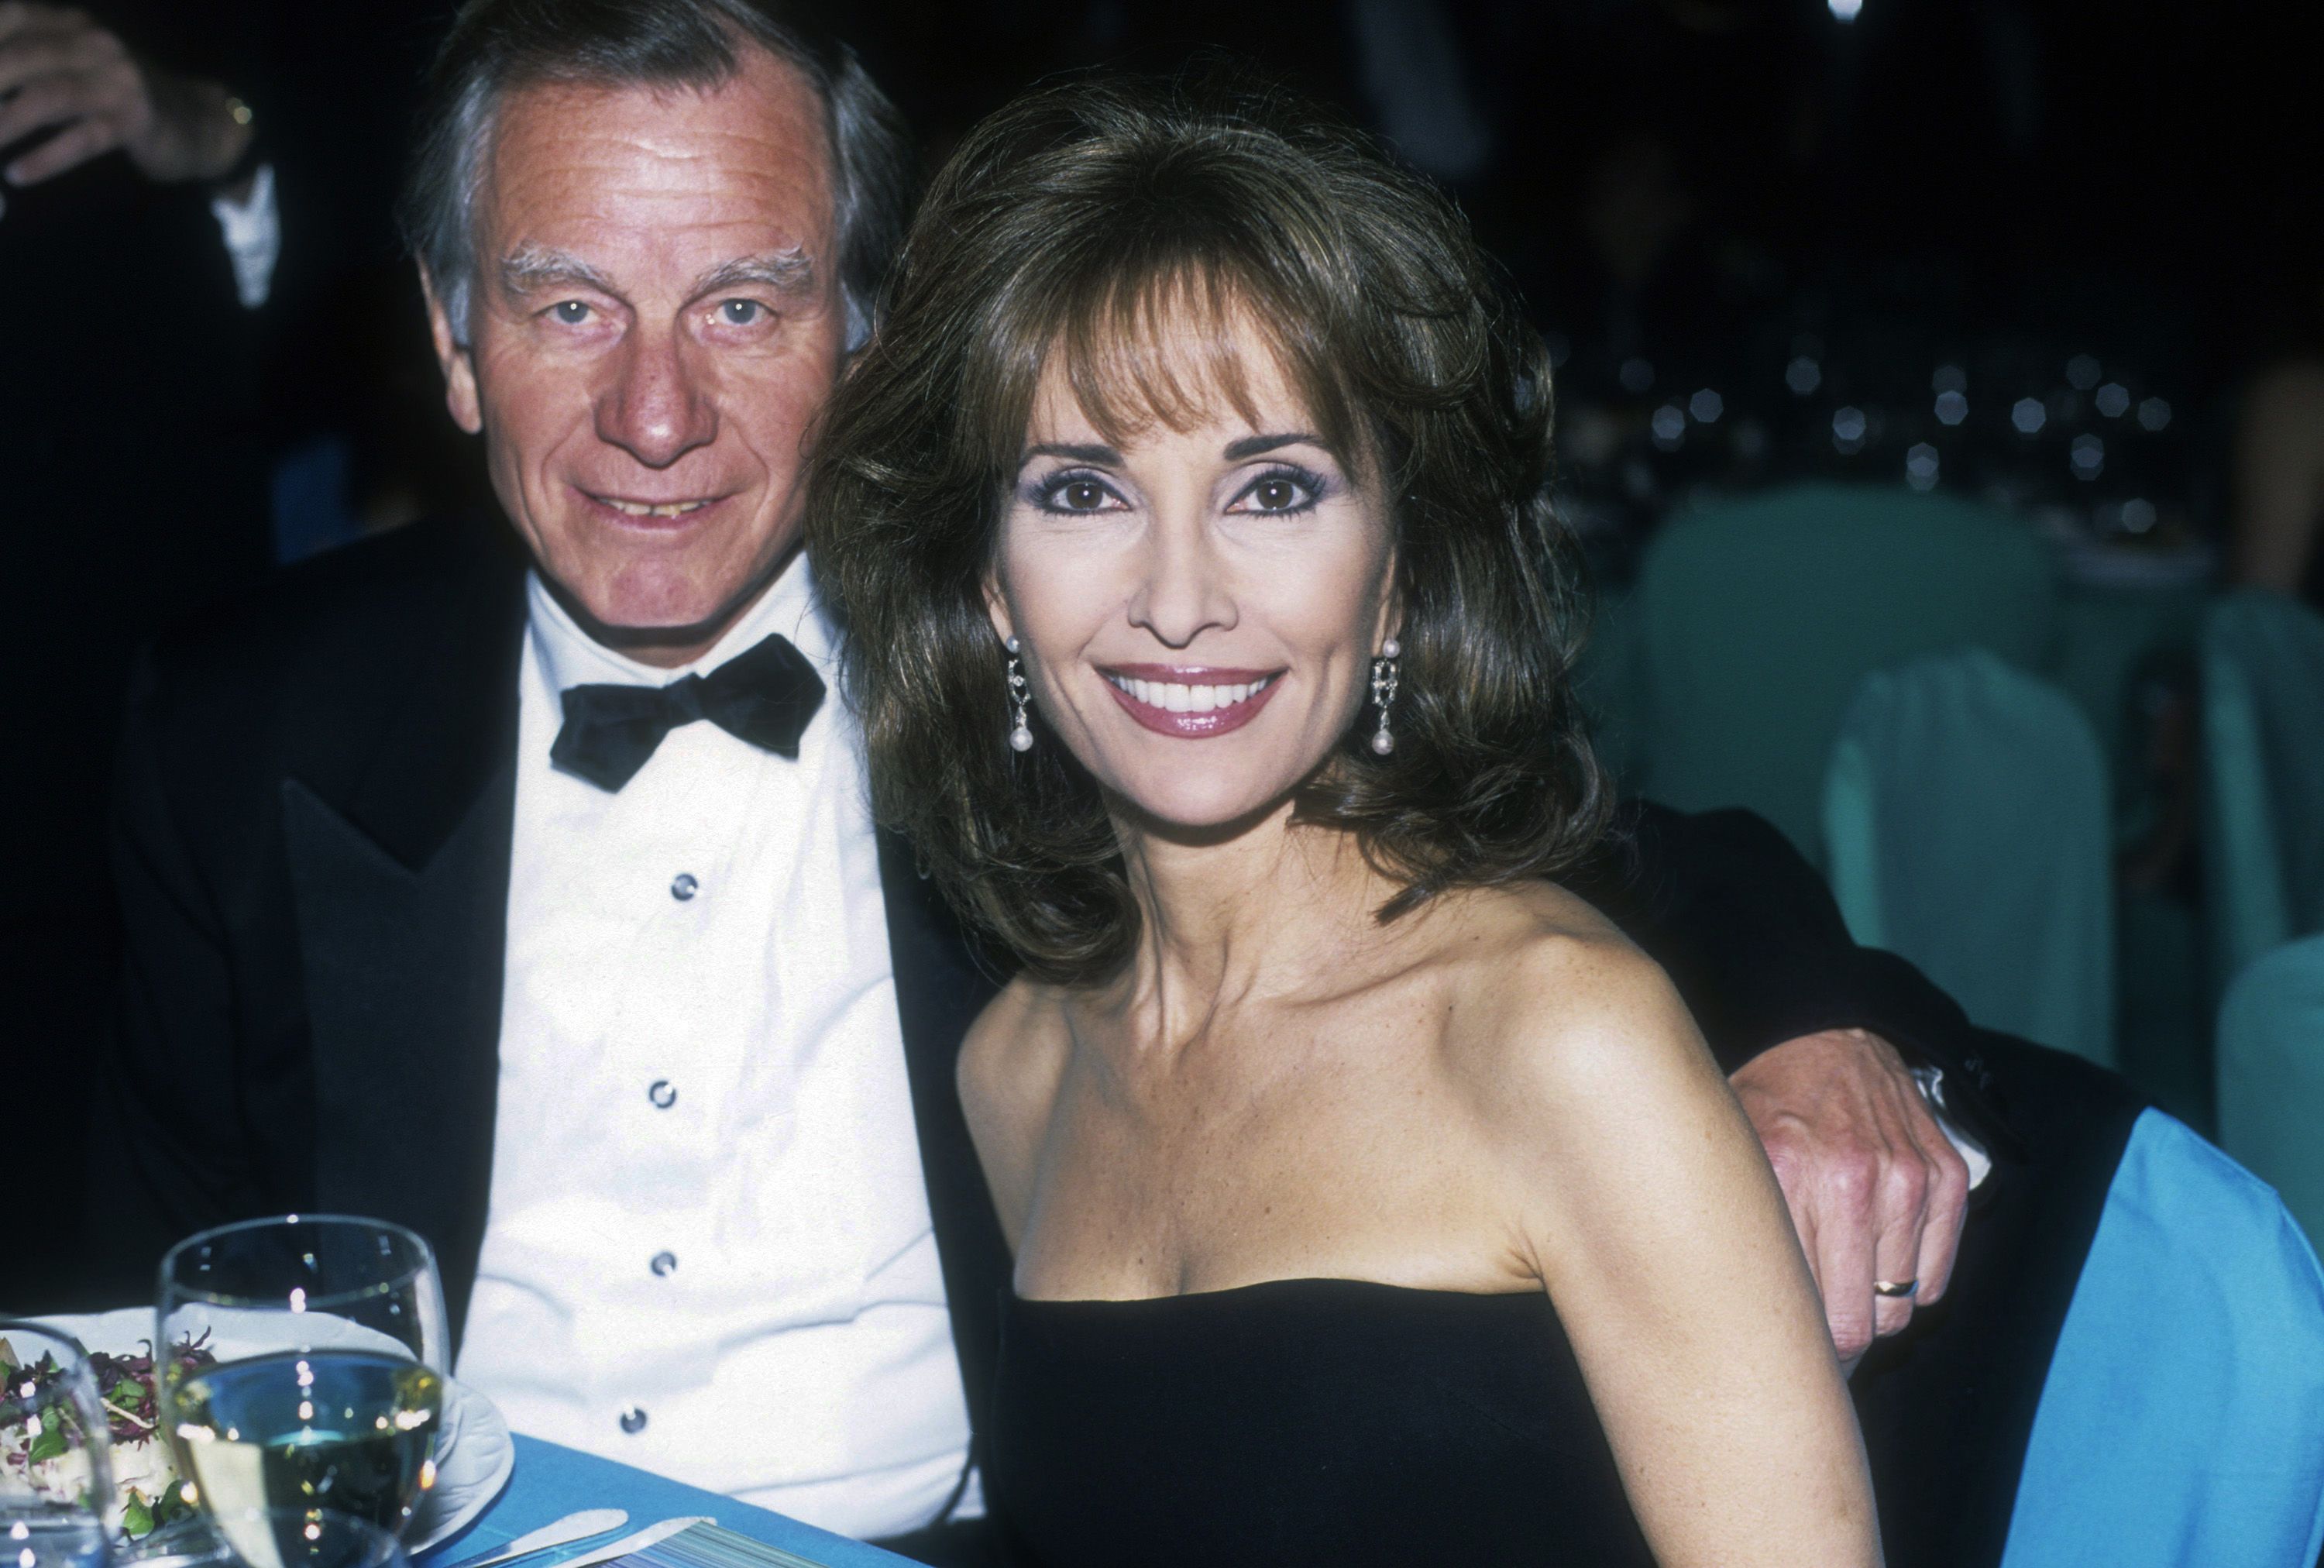 actress susan lucci and her husband helmut huber attend at news photo